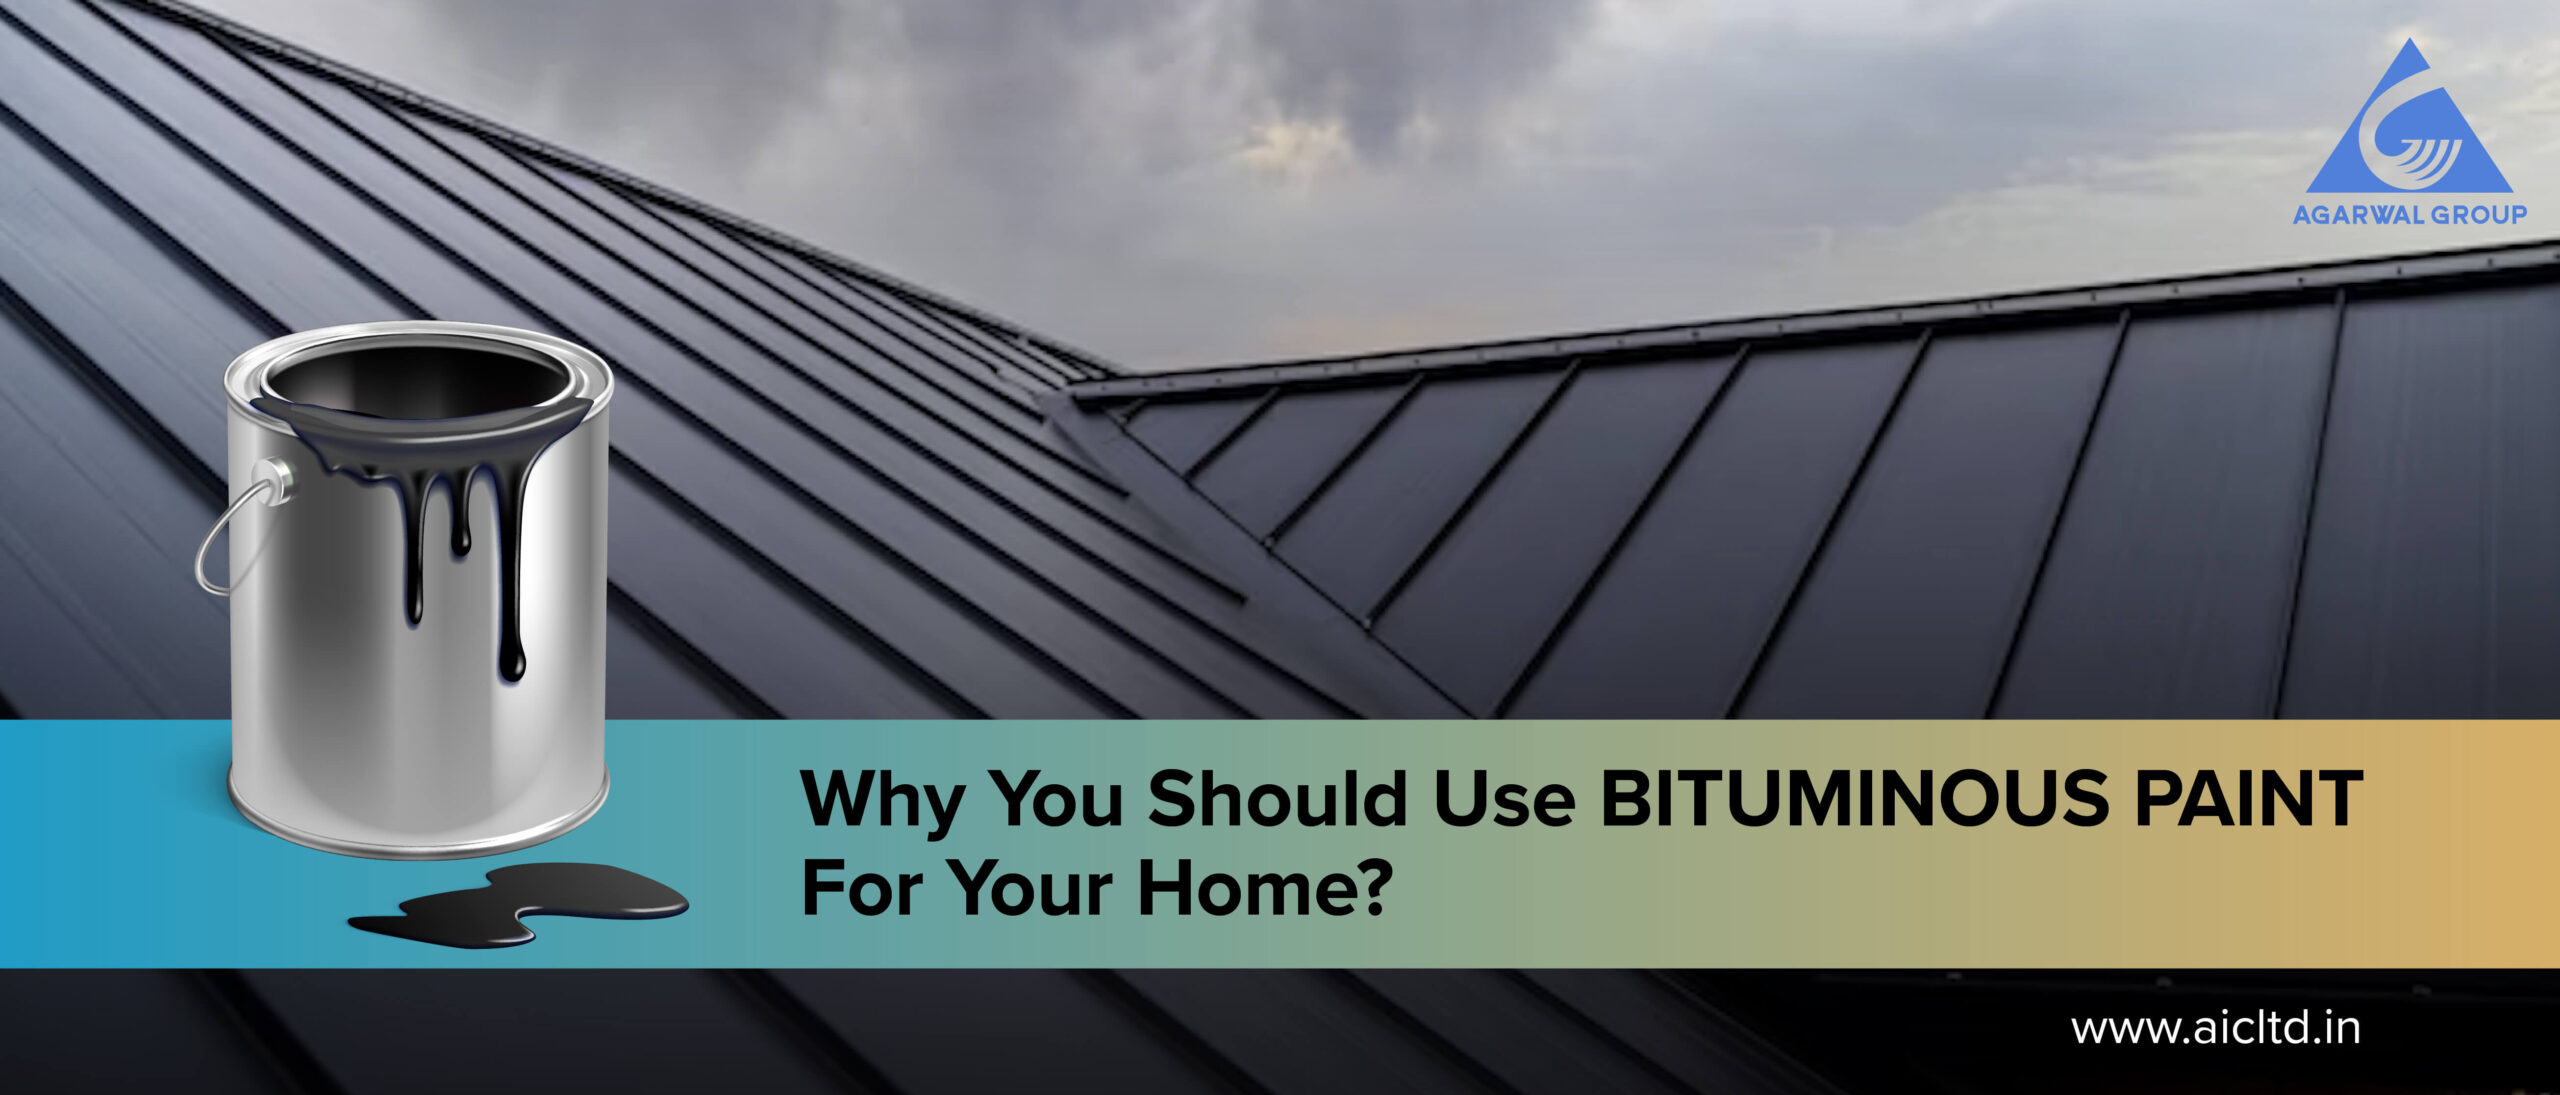 Why You Should Use Bituminous Paint Coating for Your Home?